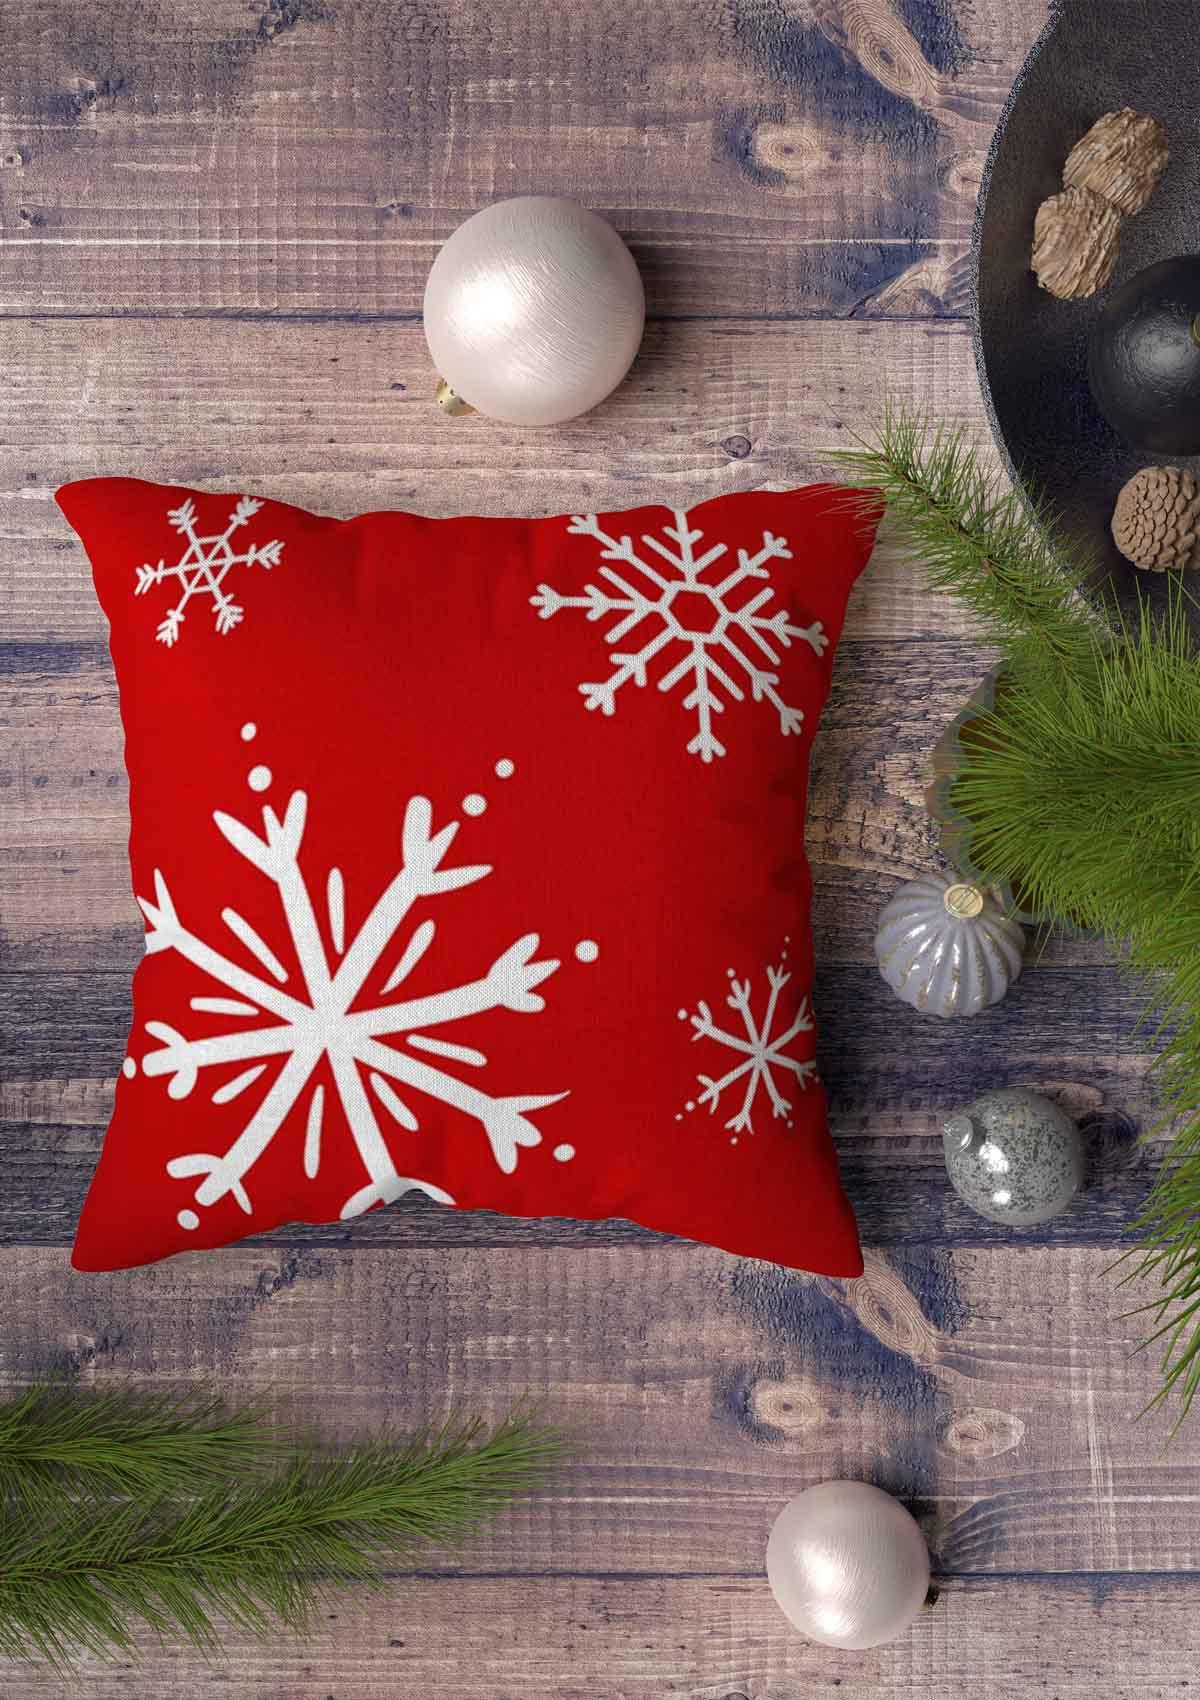 Snowflake "MerryChristmas" Cushion Cover